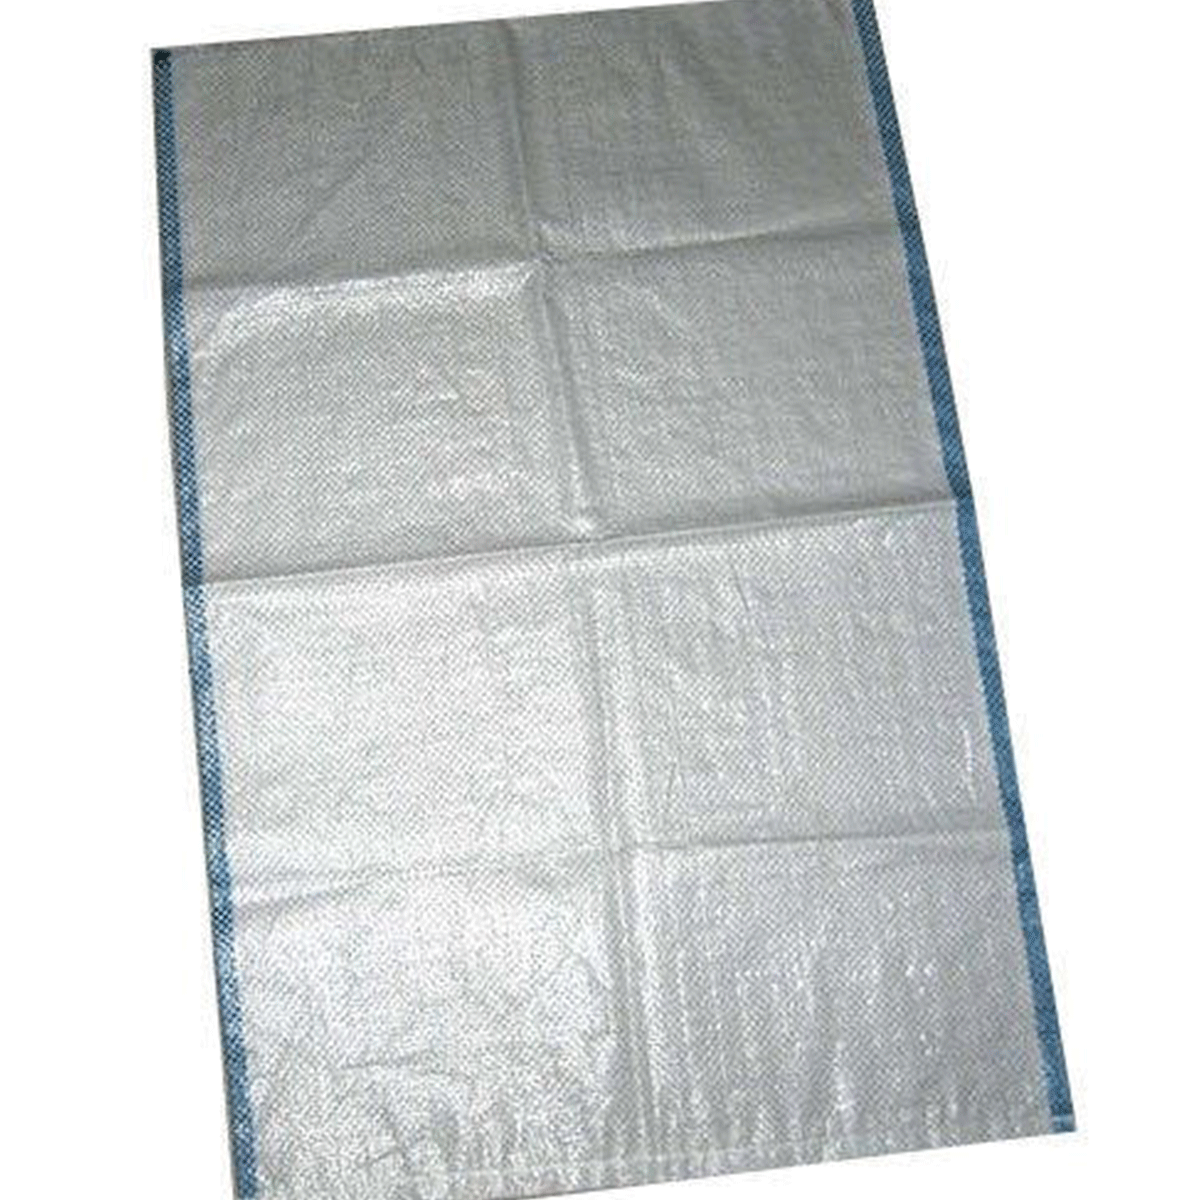 Complying with IS 17399:2020 for Laminated Woven Sacks for Mail Sorting,  Storage, Transport and Distribution